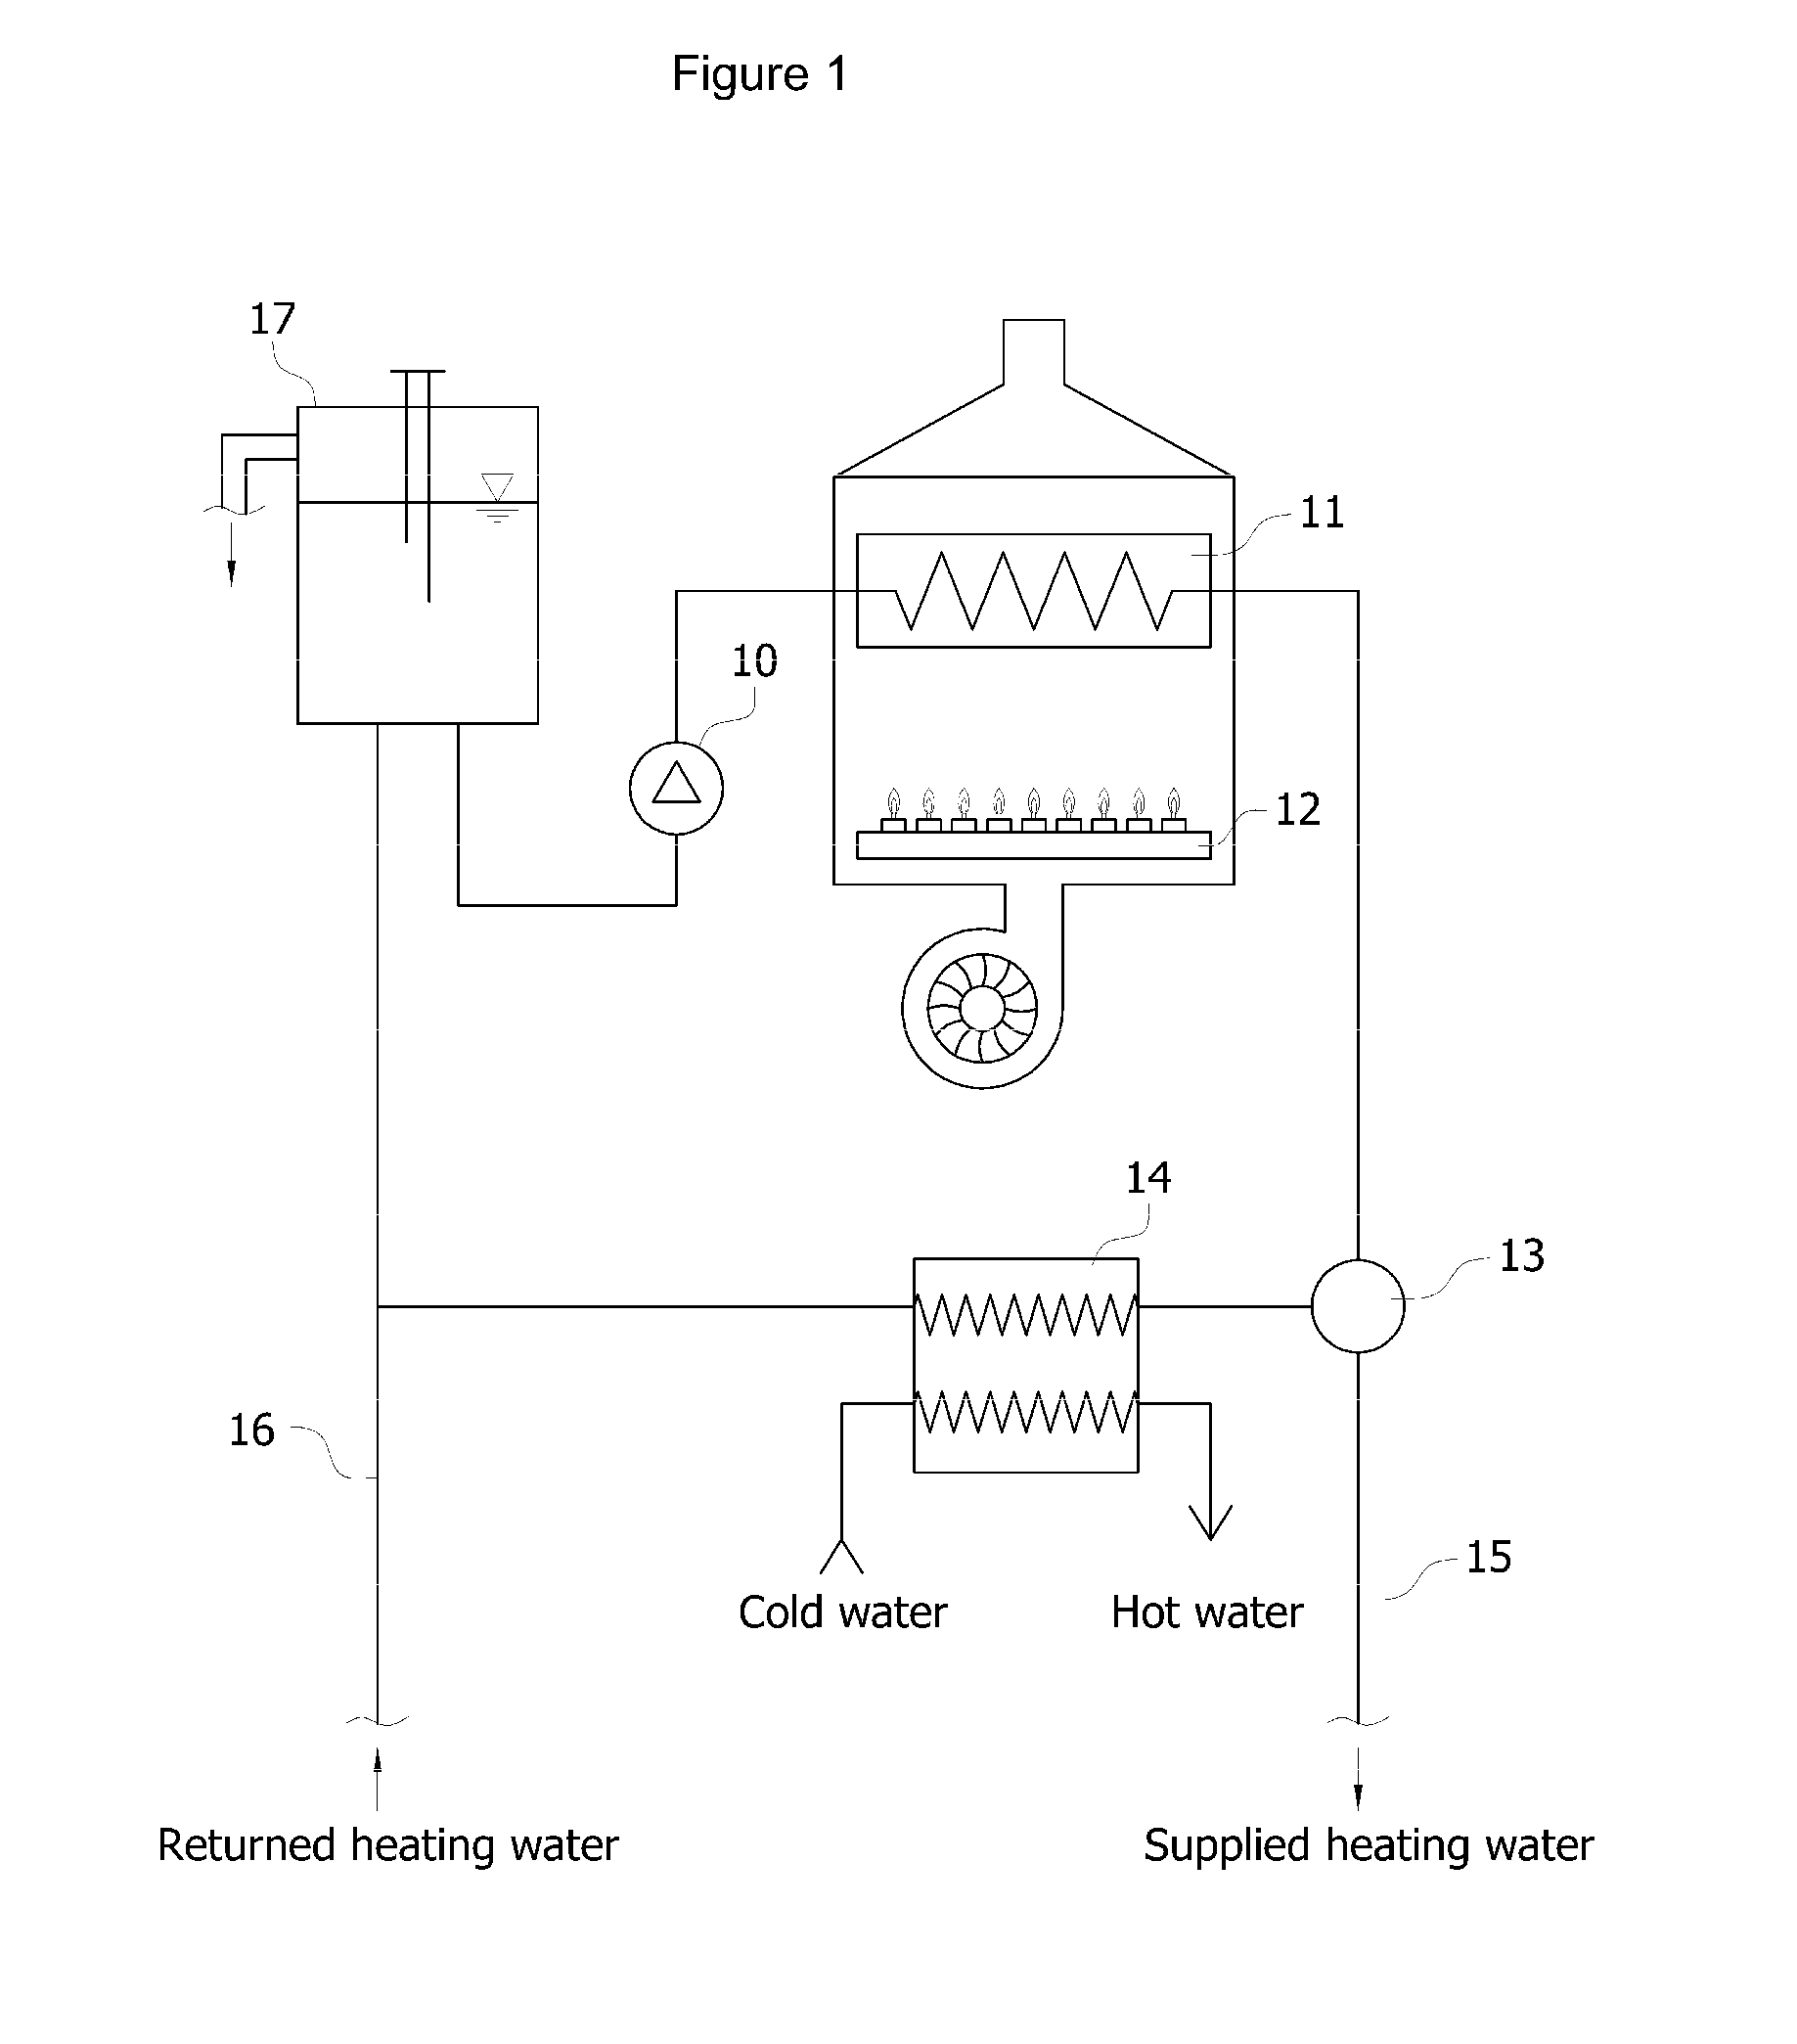 Boiler for supplying heating water and hot water simultaneously